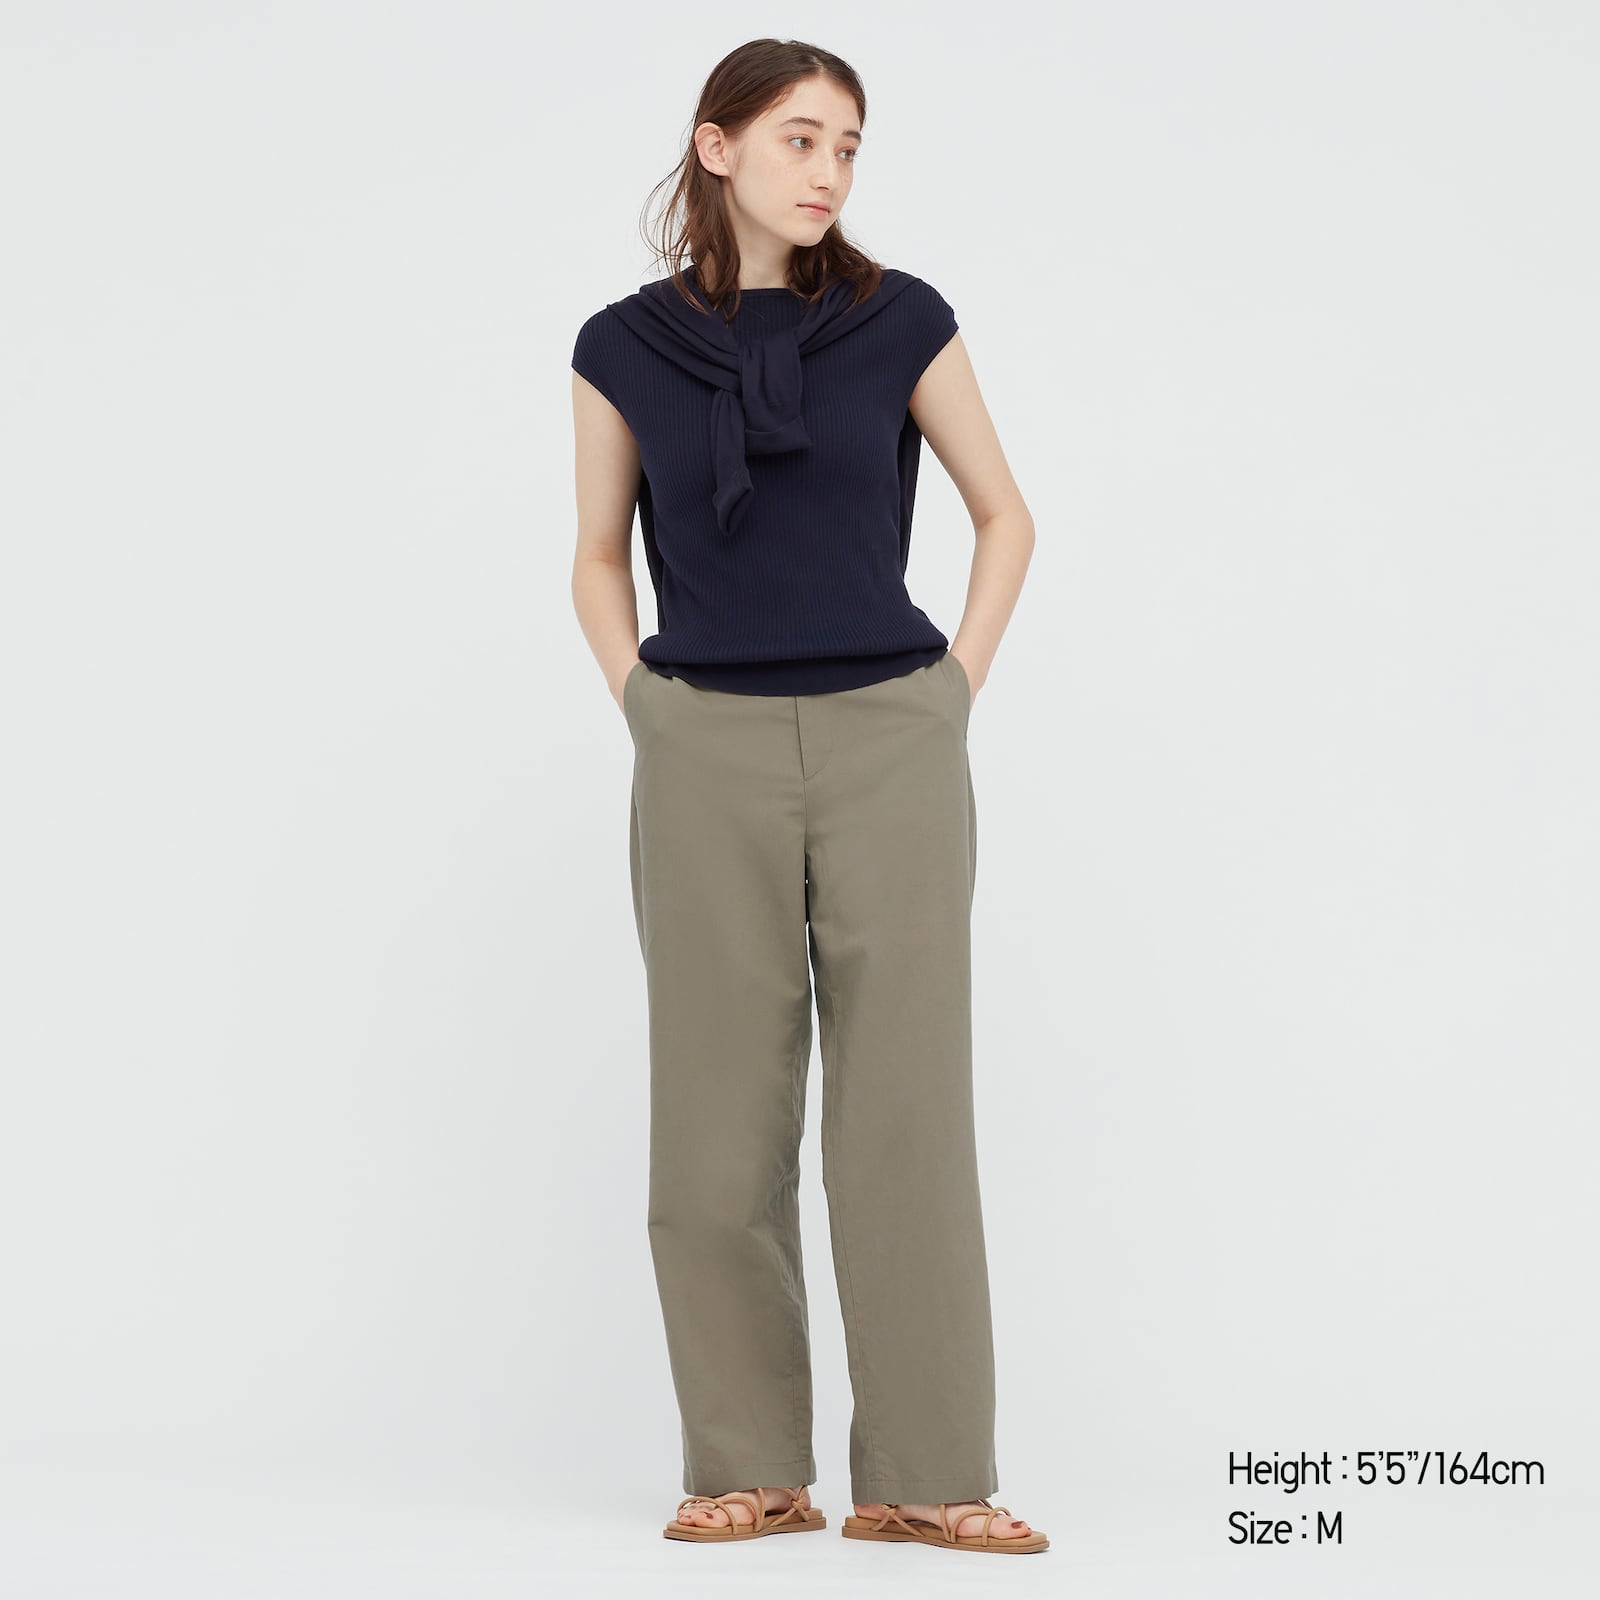 Fitting Room Review: Uniqlo Cotton Linen Pants - Welcome Objects